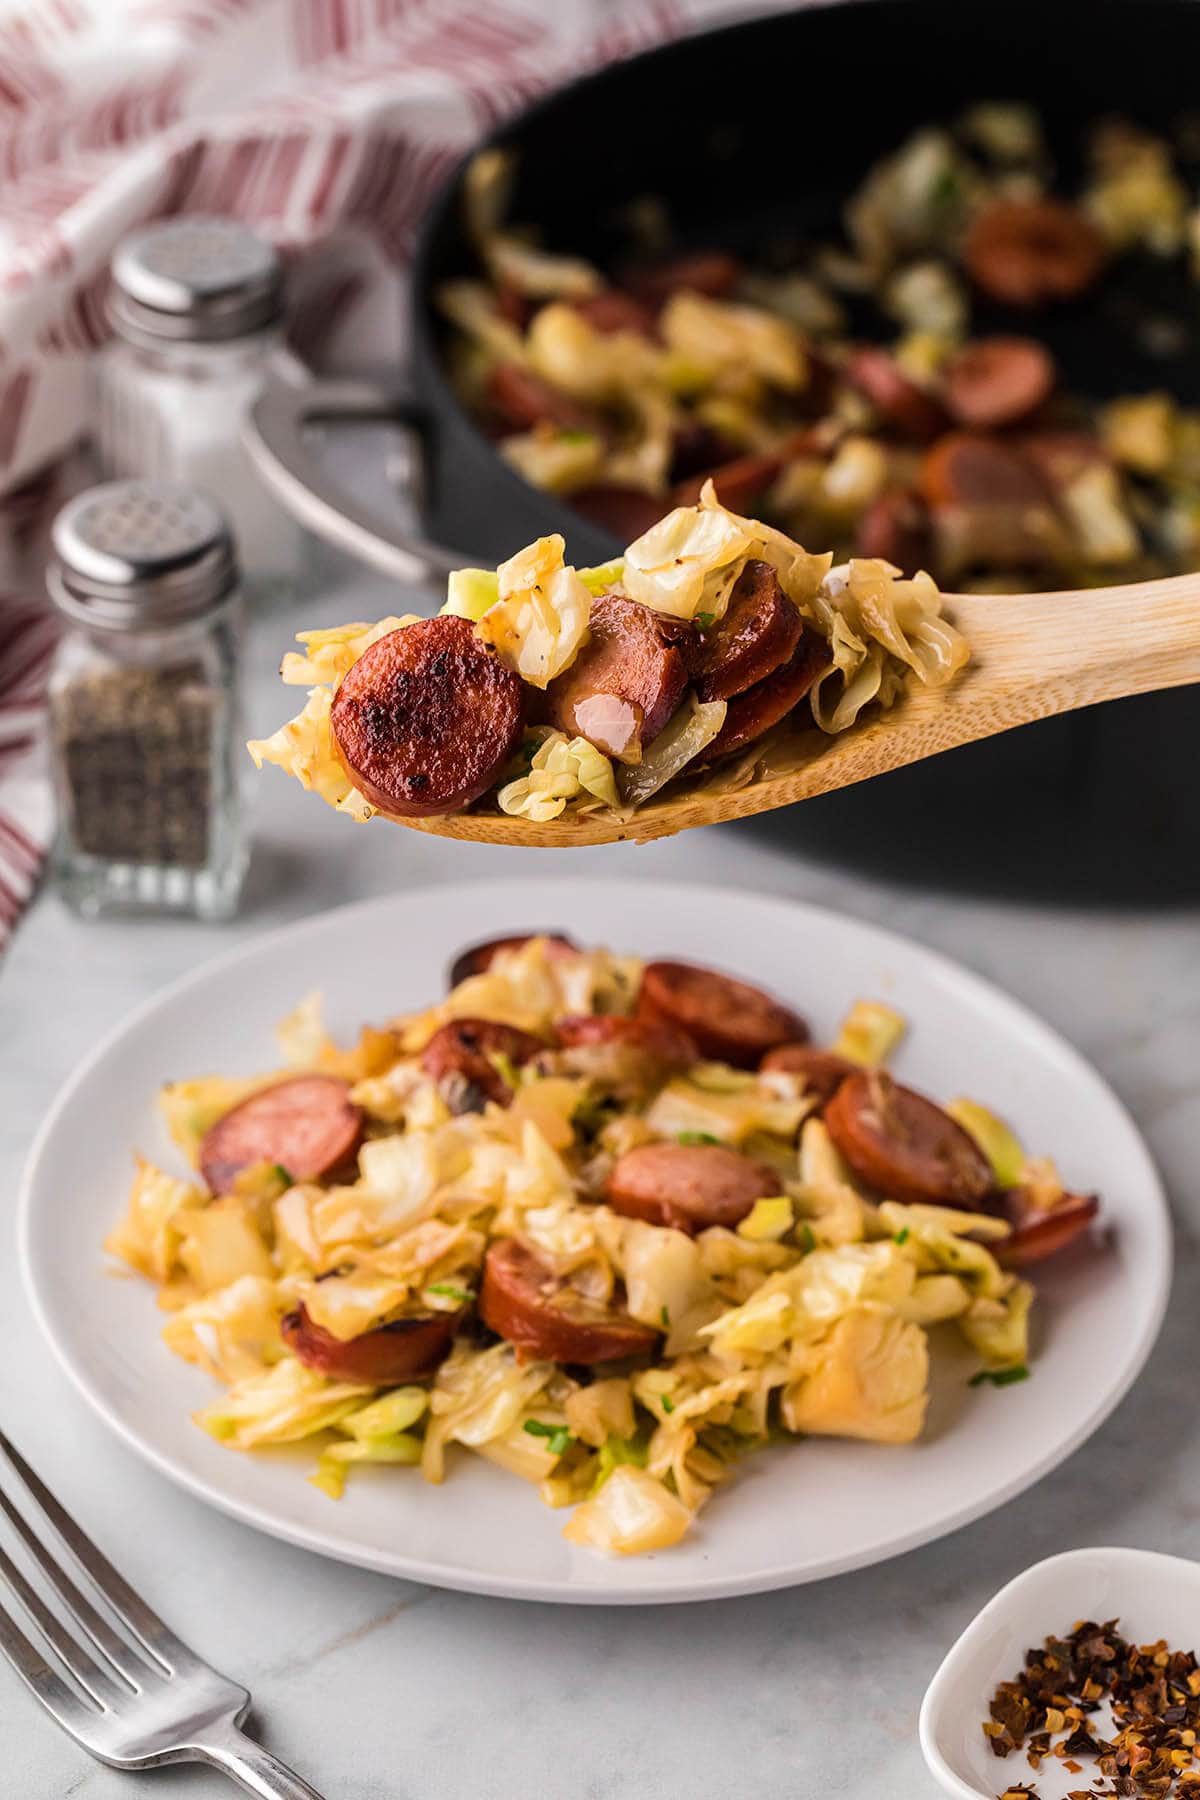 Kielbasa and cabbage on a plate with serving spoon.